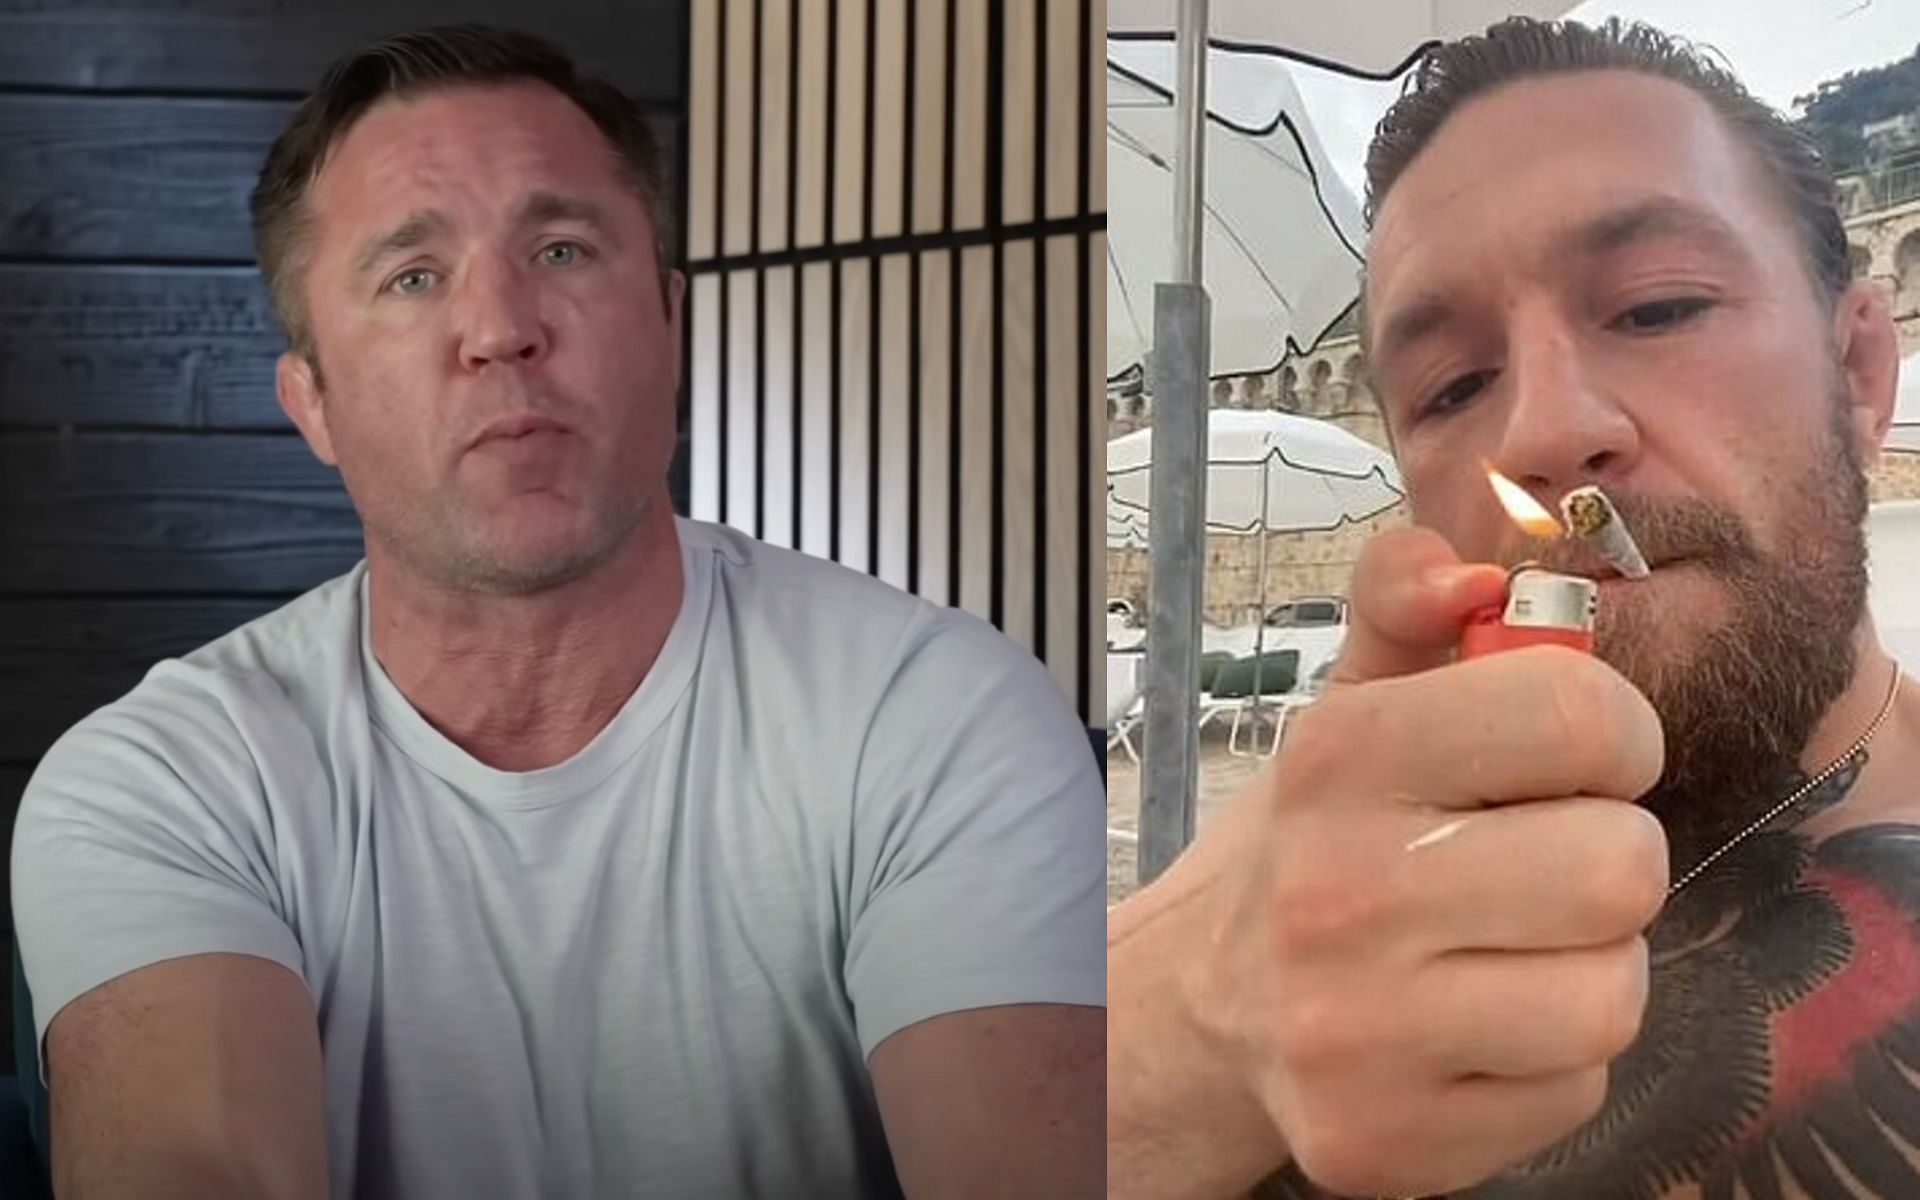 Chael Sonnen (left) and Conor McGregor (right). [via YouTube Chael Sonnen and Instagram @thenotoriousmma]